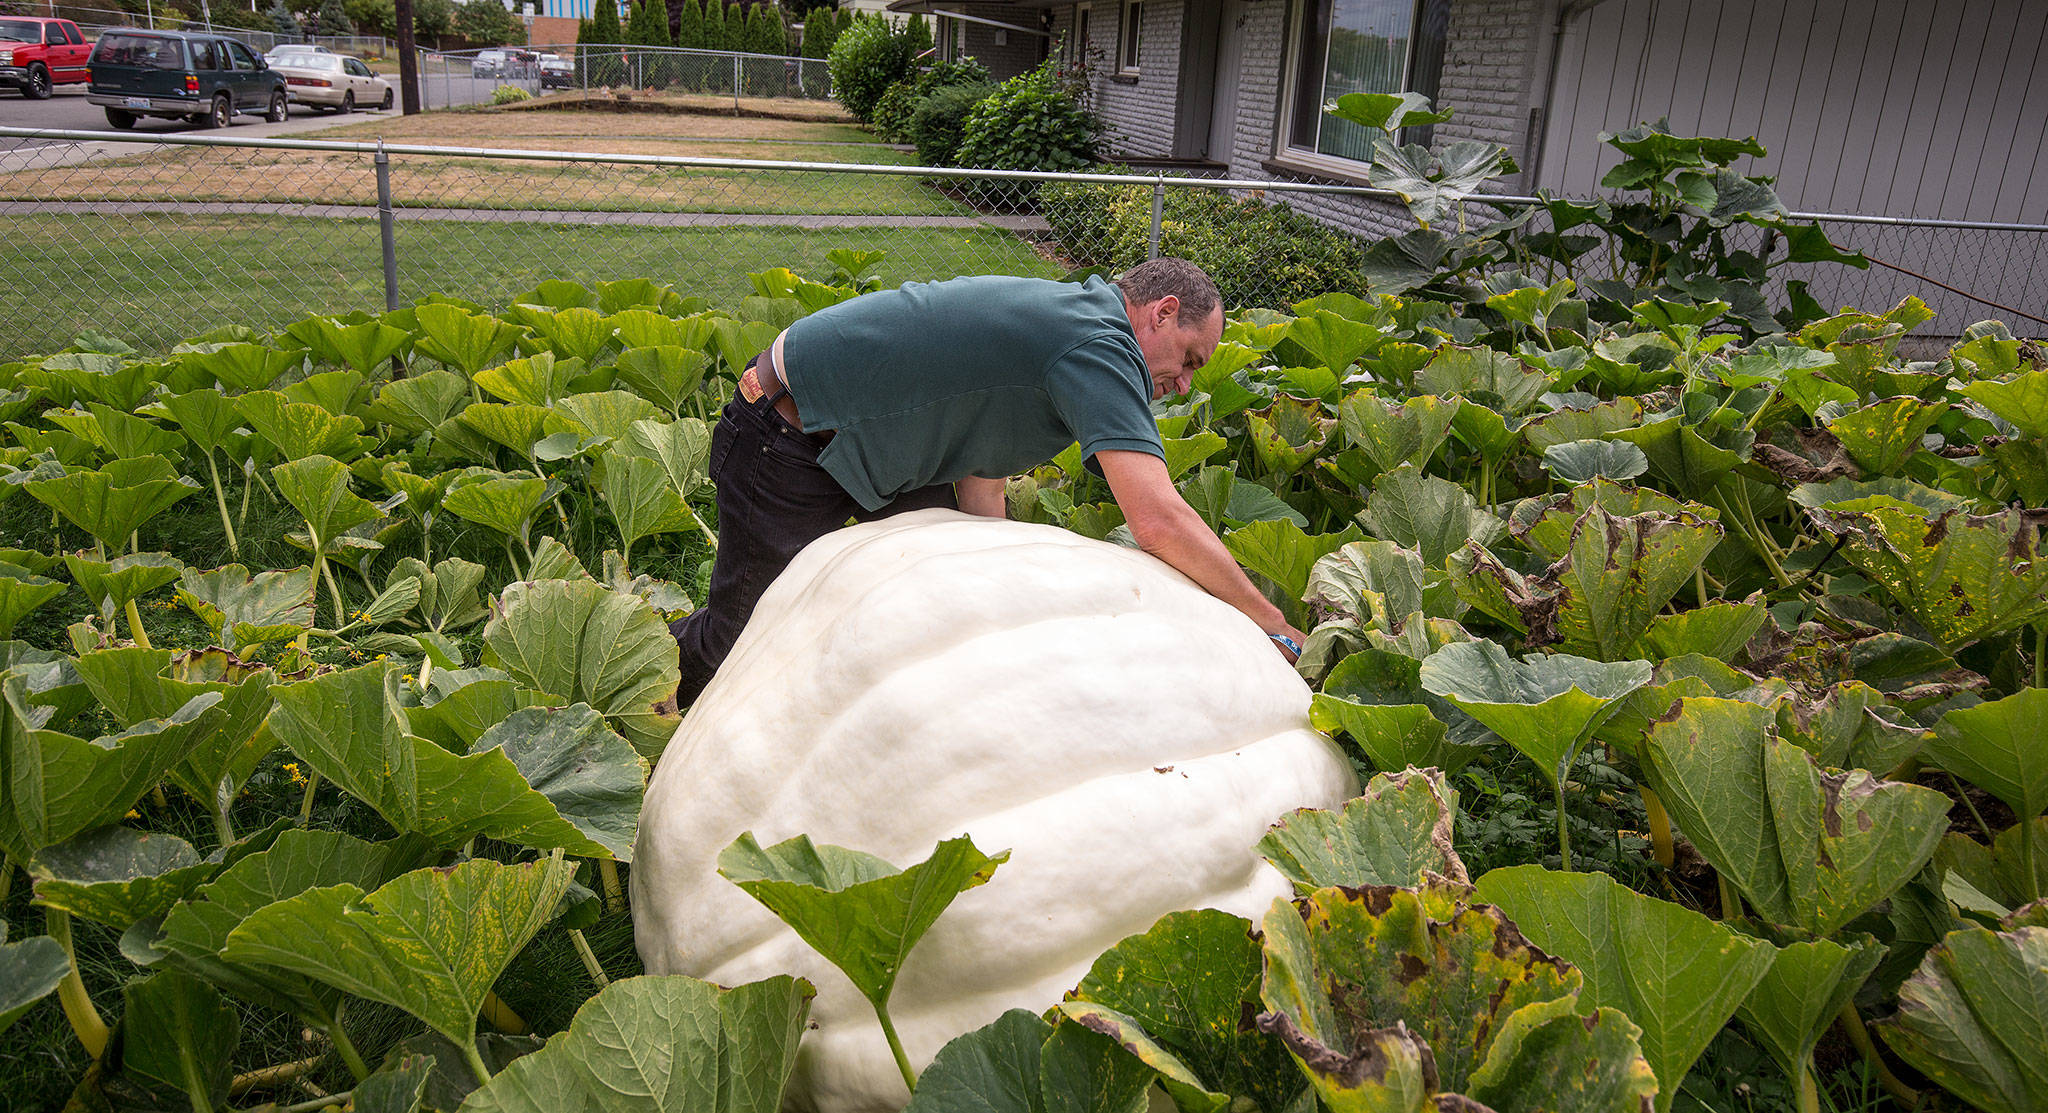 Using a 5-foot tape, Gary Baldwin measures his pumpkin that he estimates weighs about 1,000 pounds in the yard of his Everett home on Sept. 11. (Andy Bronson / The Herald)